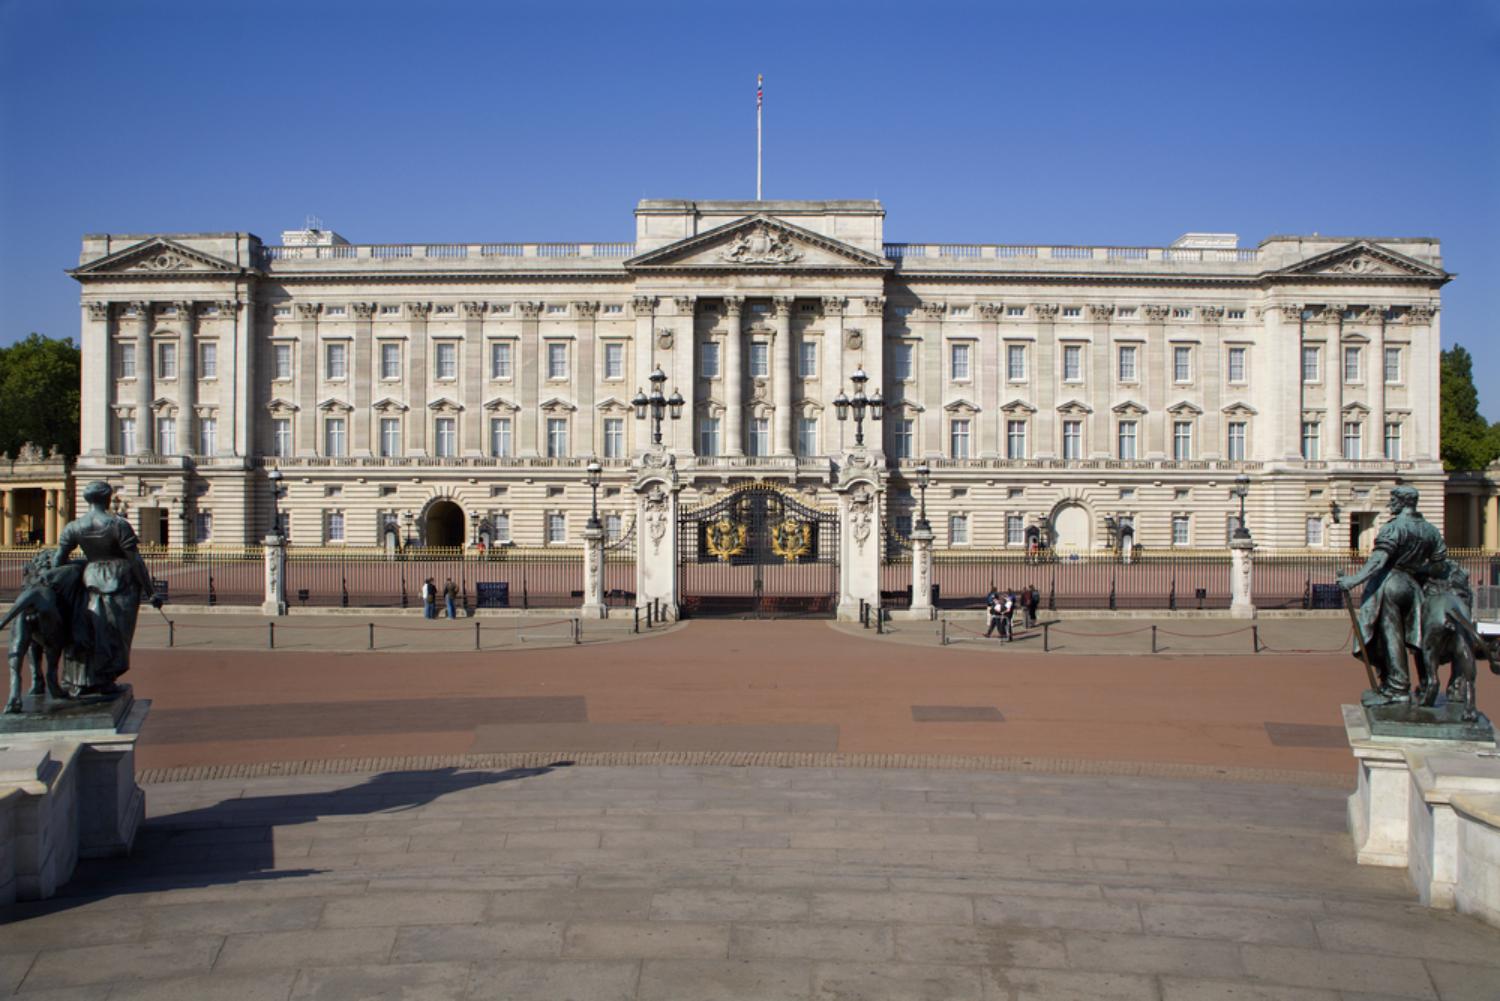 Tour of Buckingham Palace and Windsor Castle – Beat the queues!